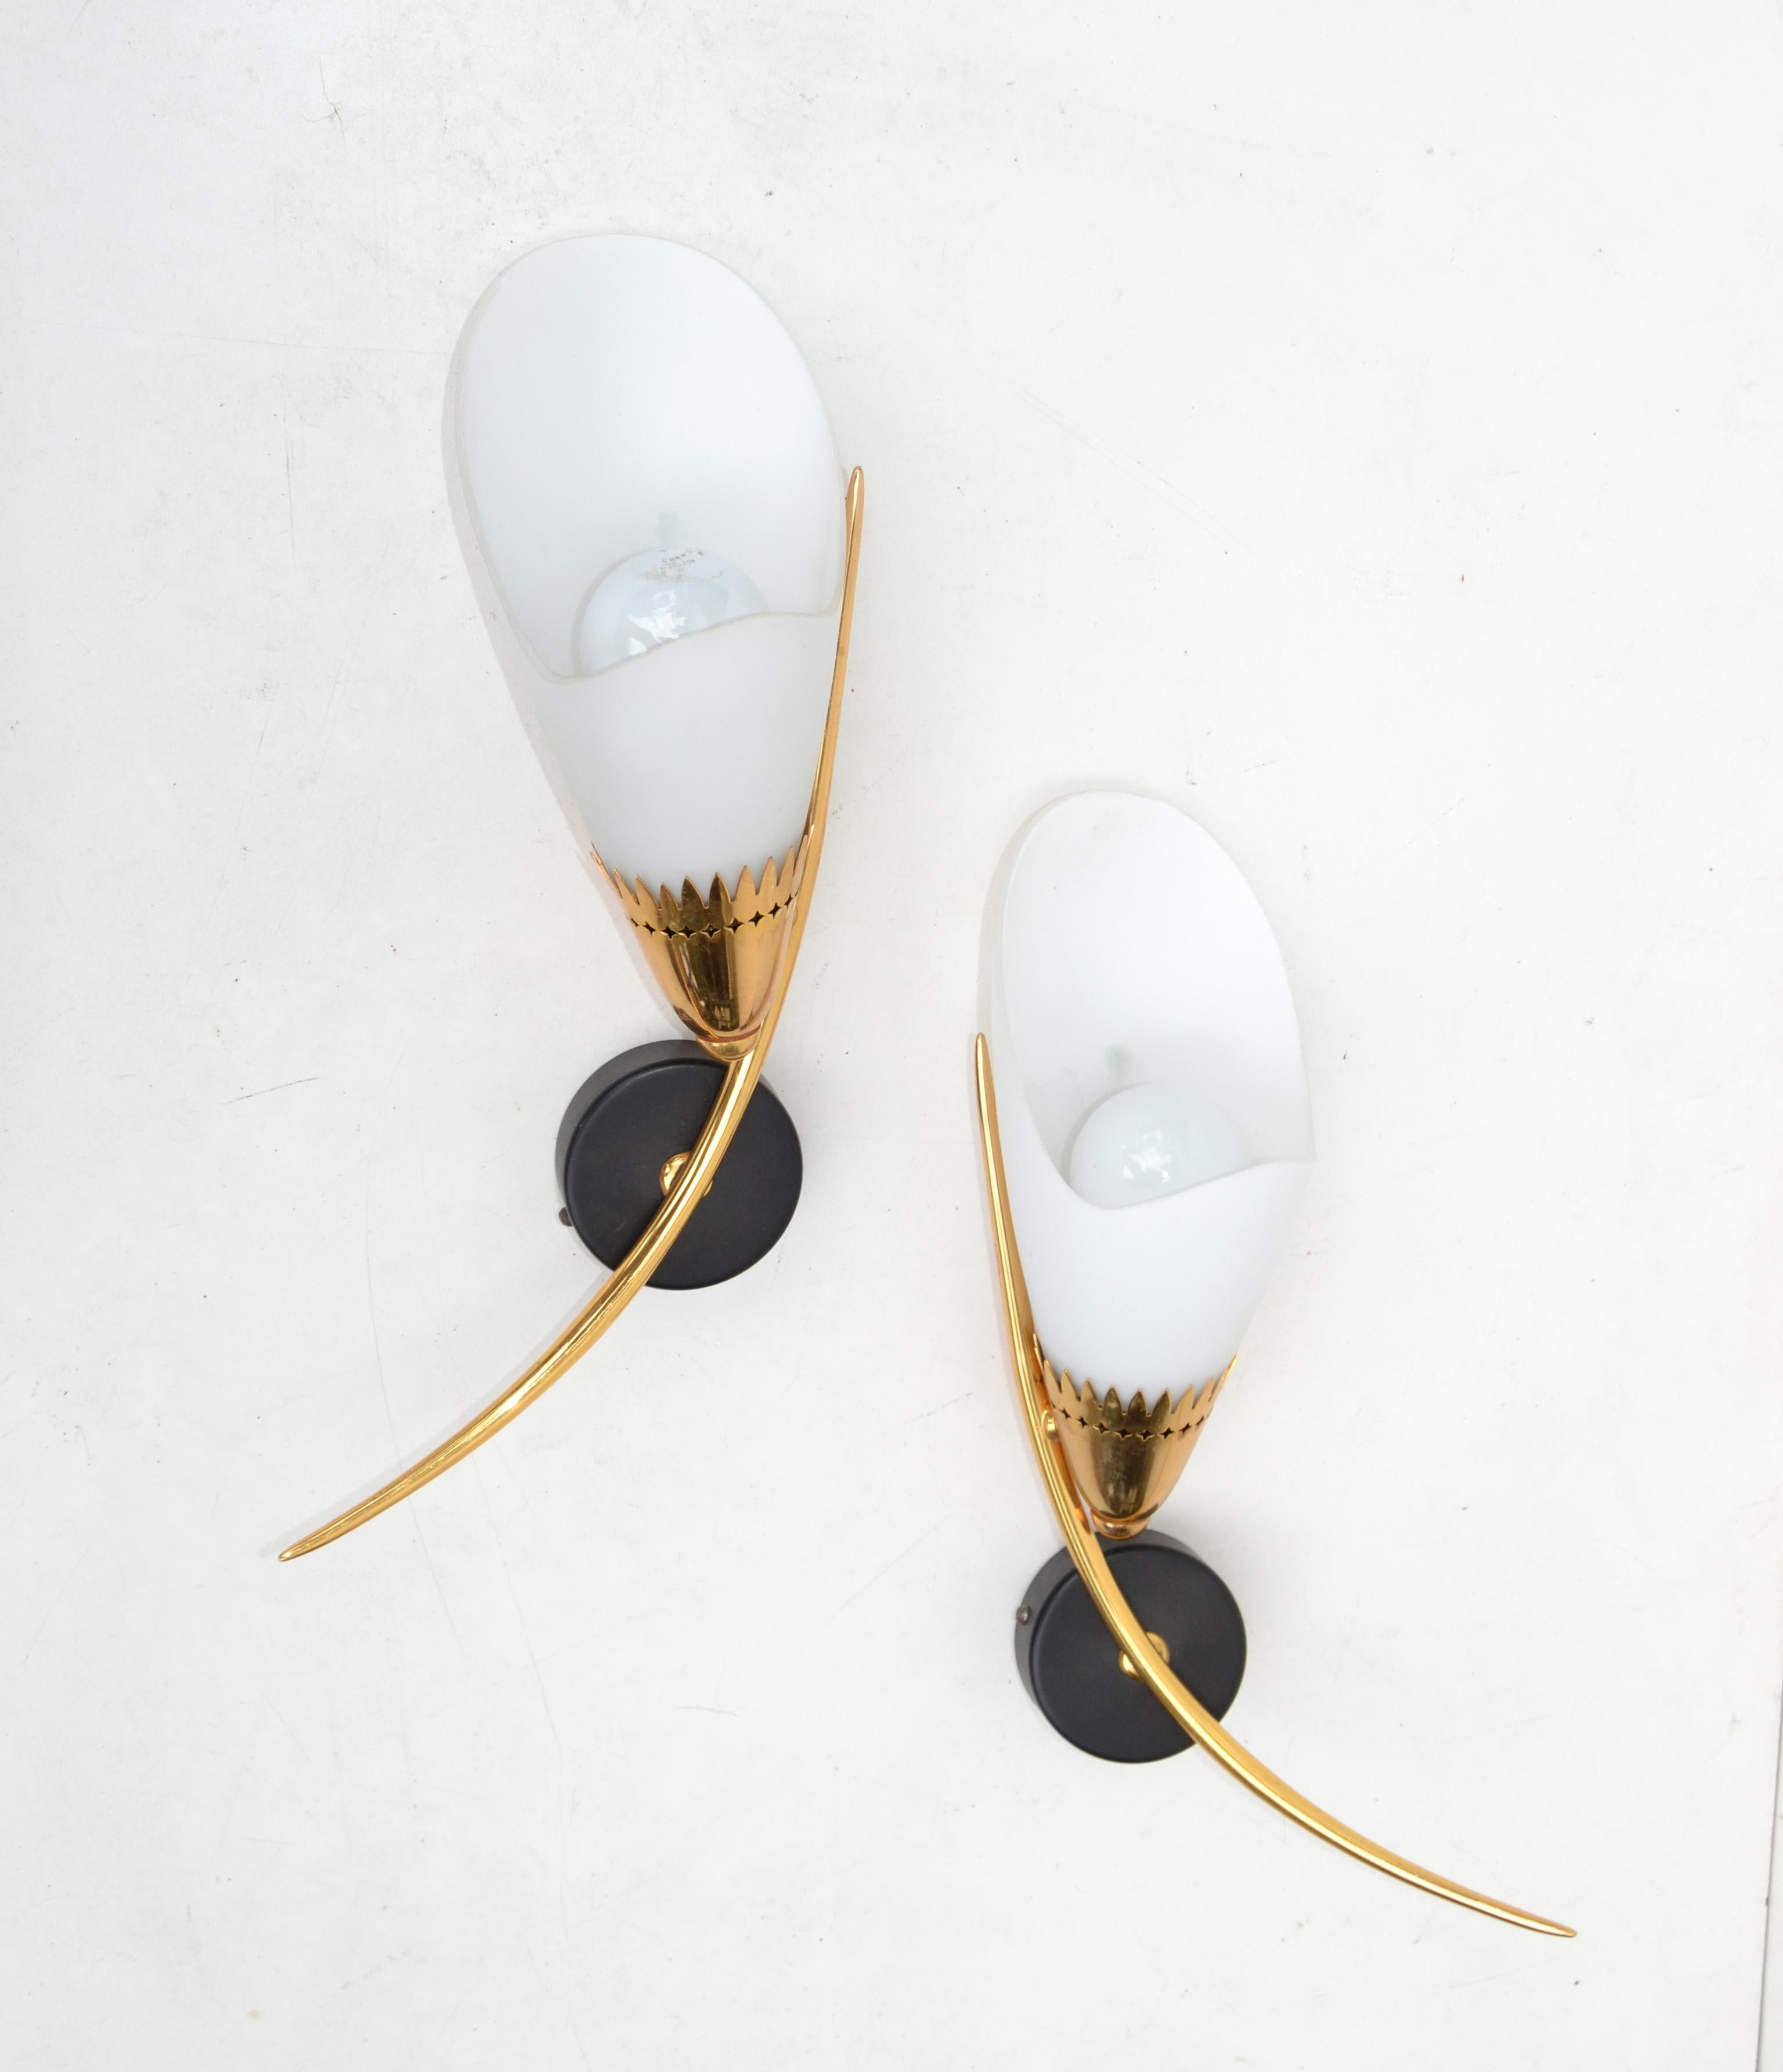 Maison Lunel Mirror Image Sconces Brass Steel & Opaline Shade France 1960, Pair For Sale 5